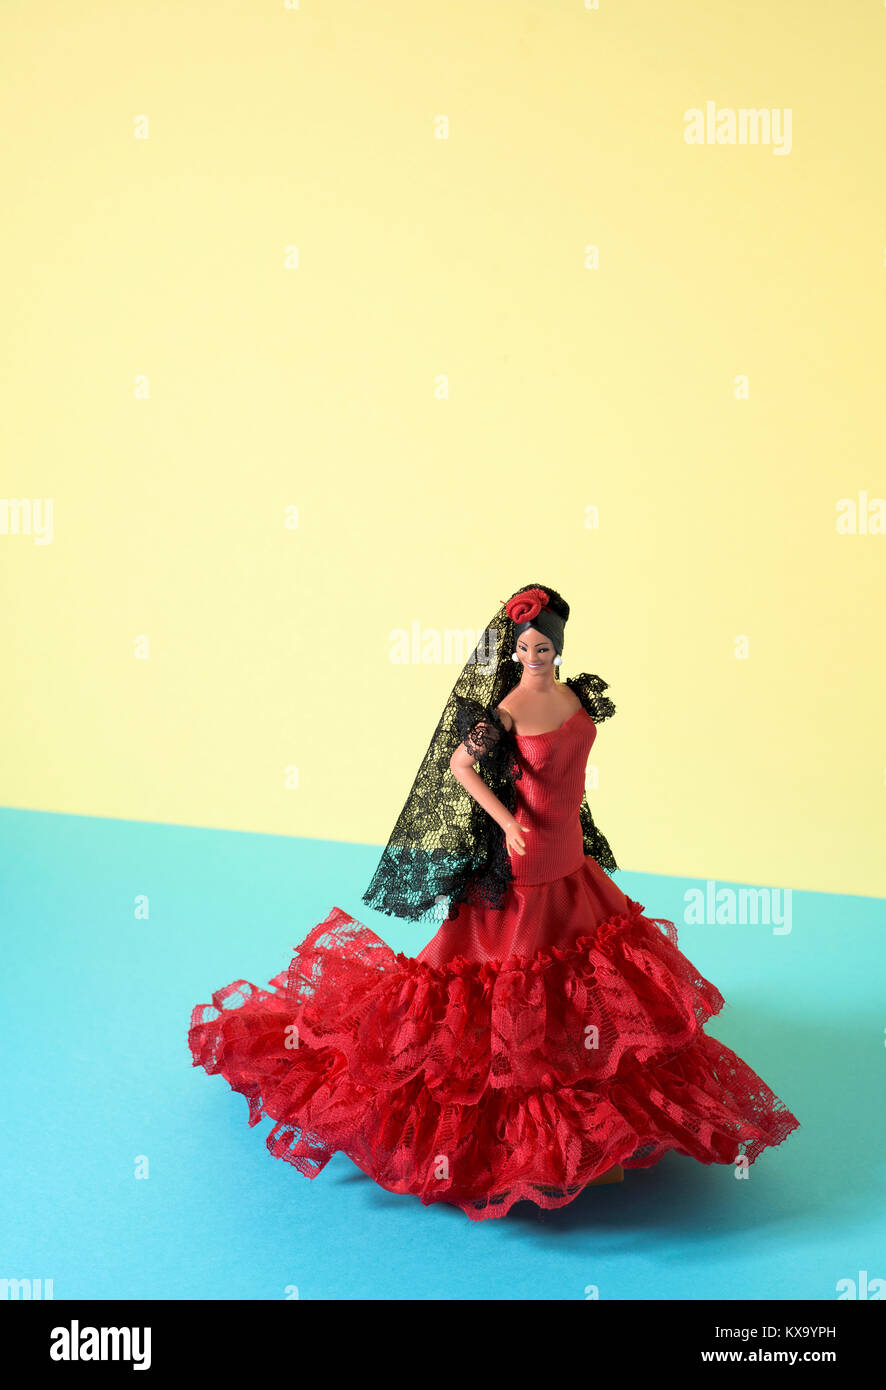 a typical spanish doll dressed as a flamenco dancer, with the characteristic traje de flamenca, the typical dot-patterned dress, in a yellow and blue  Stock Photo